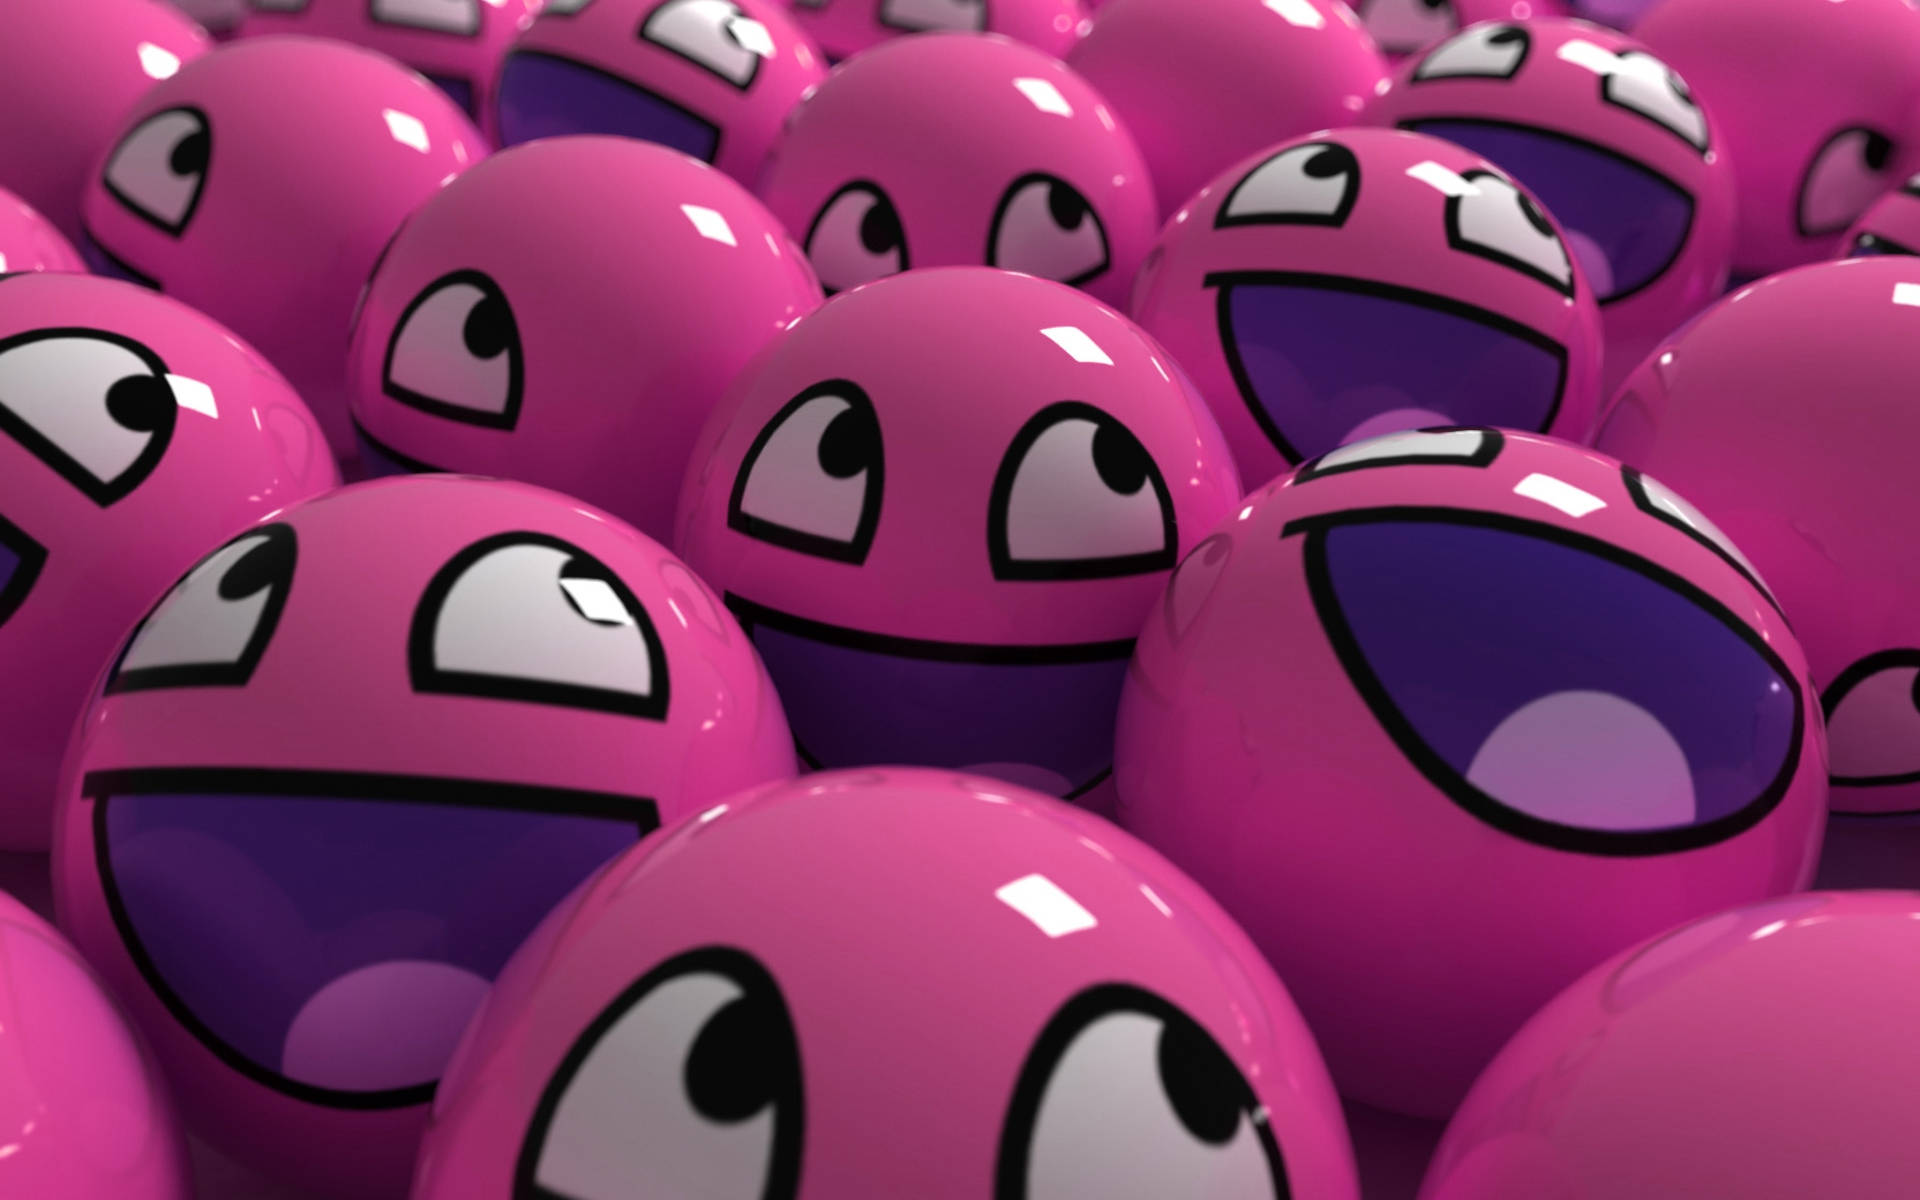 Cute And Pink Balls Smiling Faces Background